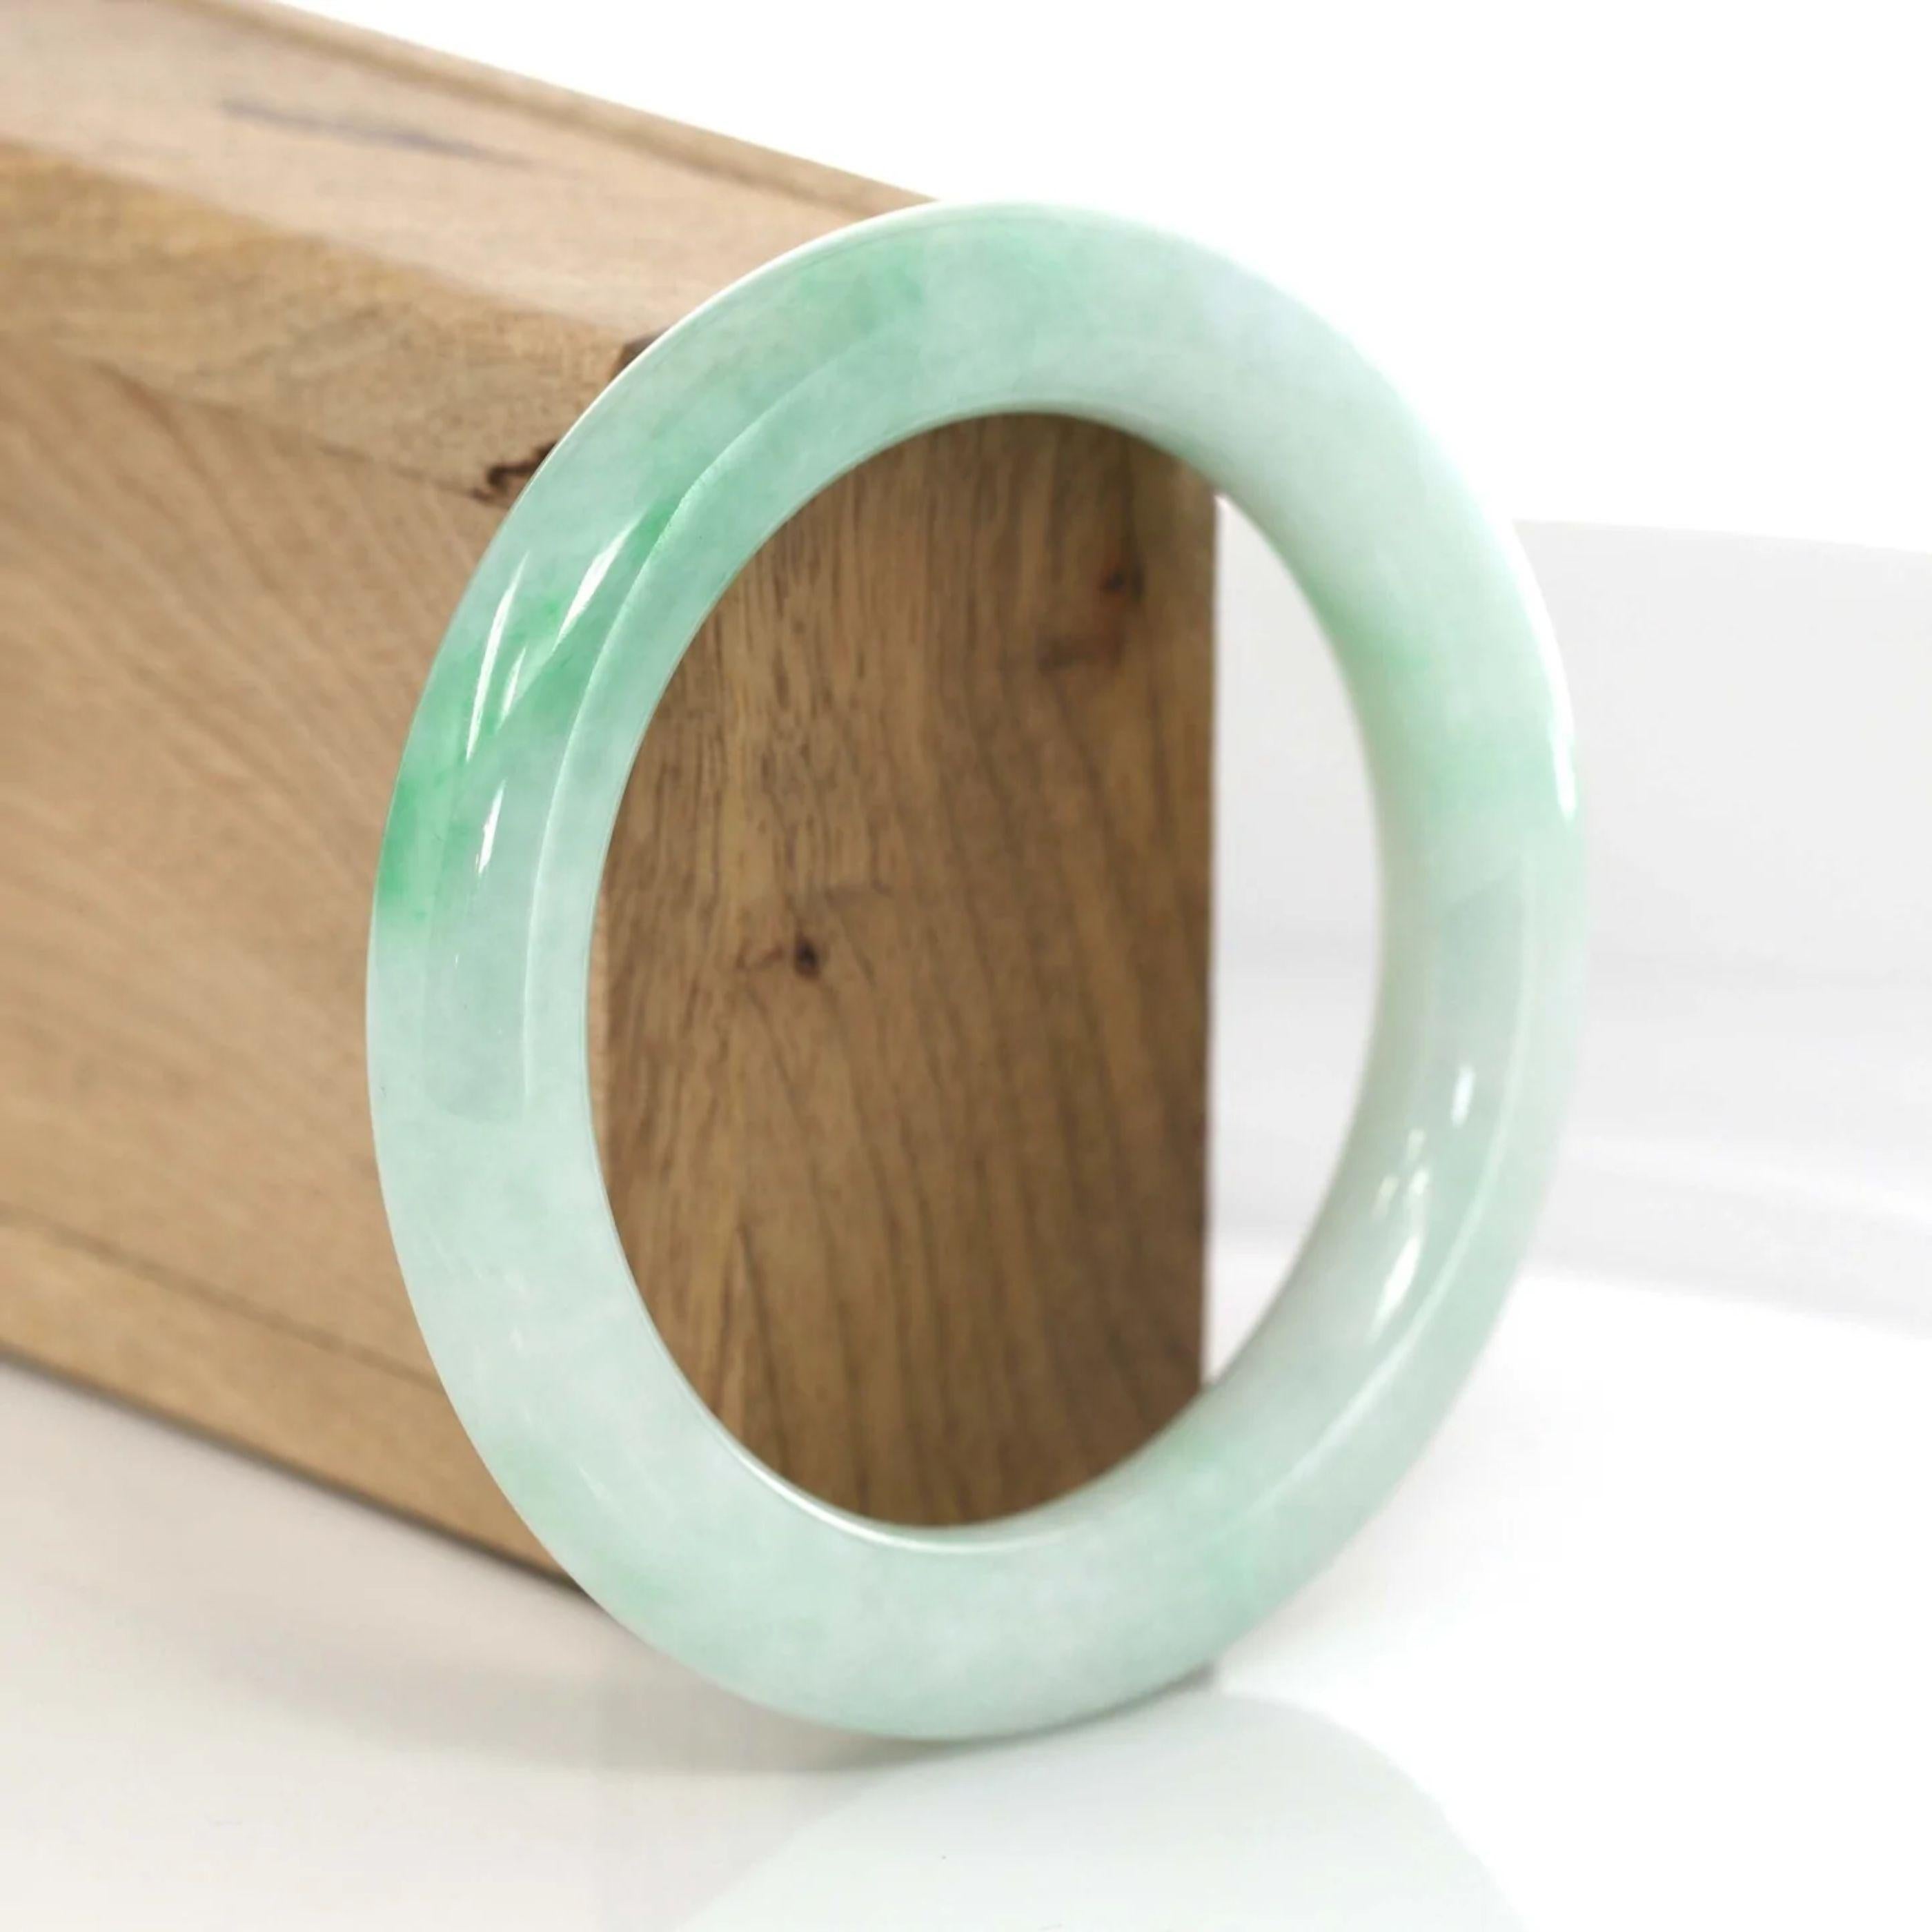 * DETAILS---This bangle is made with genuine green Jadeite jade, the jade texture is very smooth with white jade. The green color and translucent white texture are truly a mesmerizing combination. The Classic round style bracelet is gorgeous and